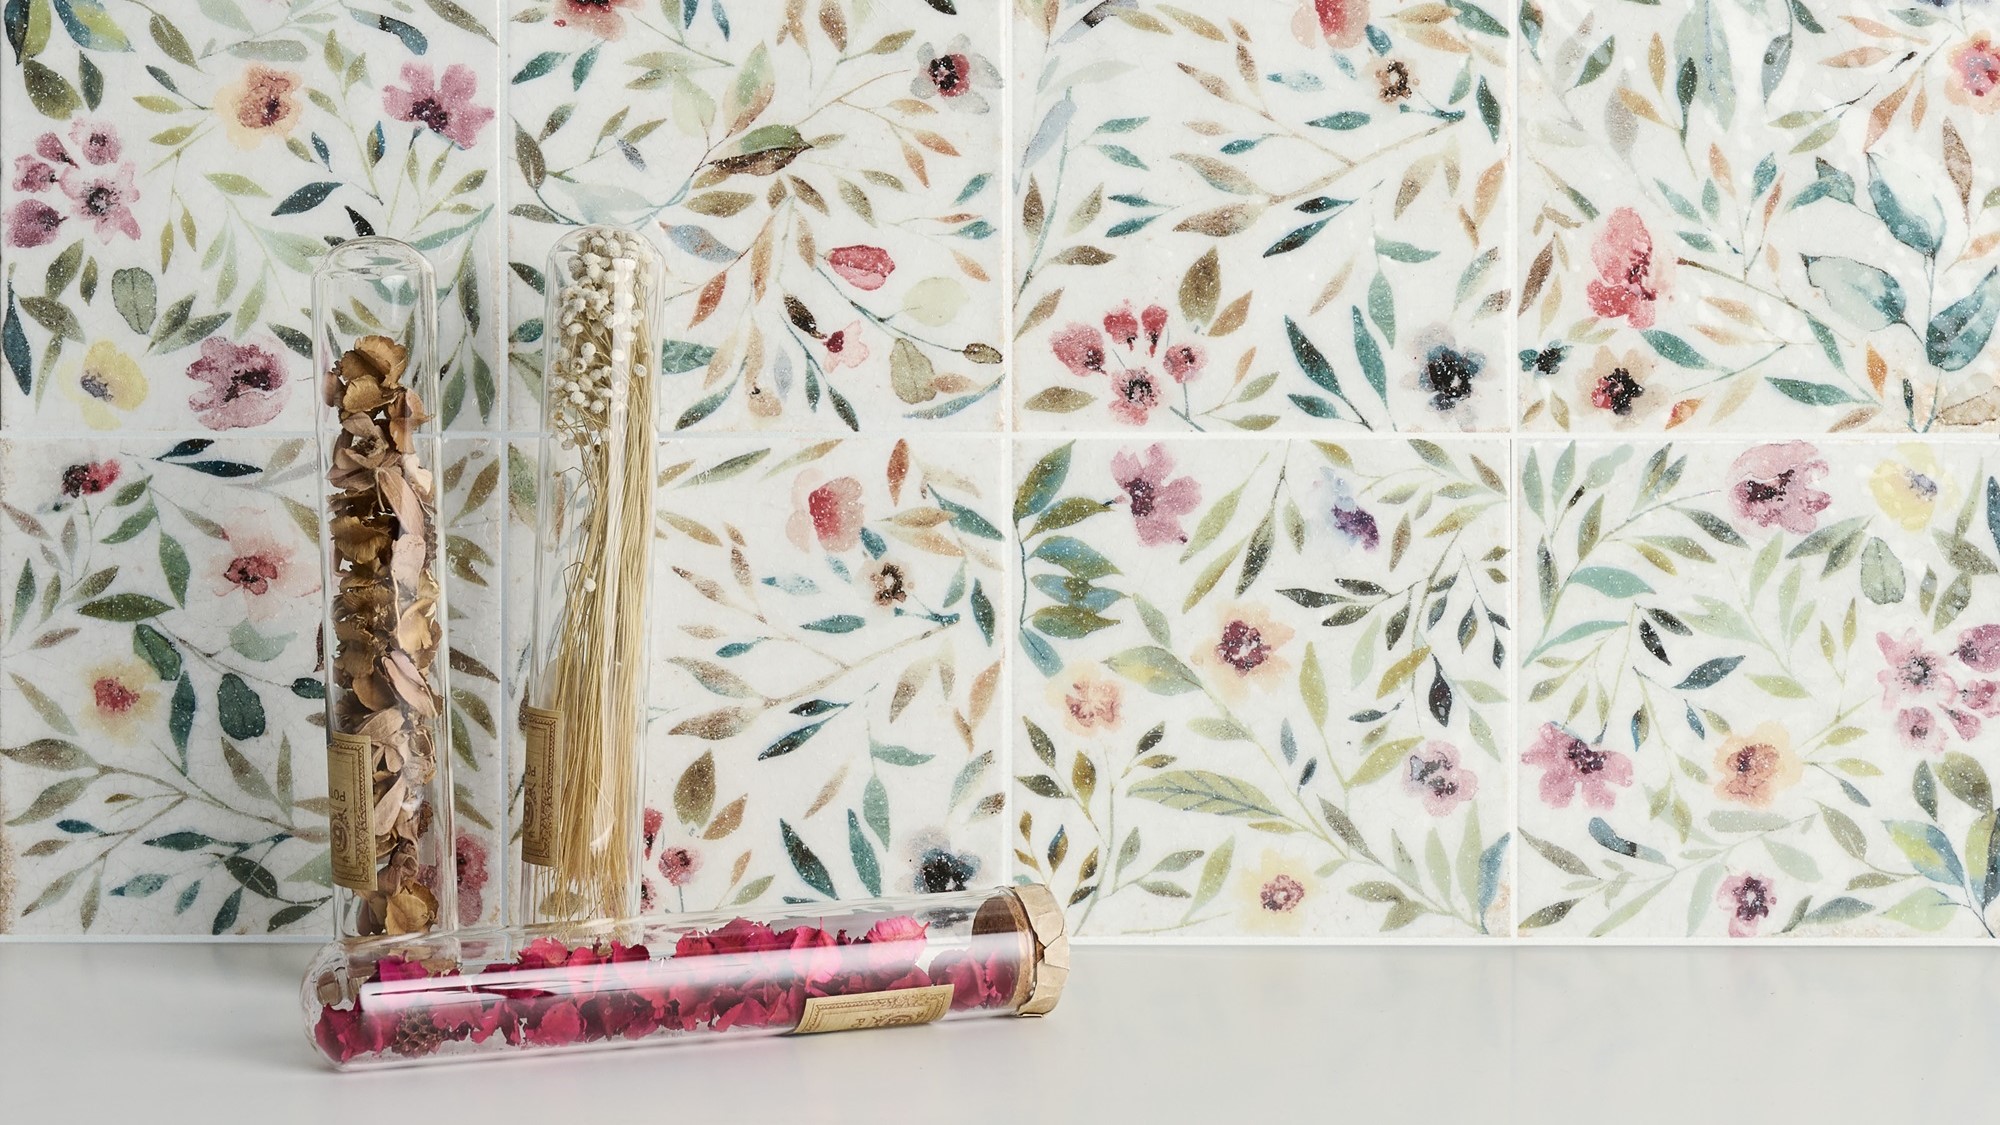 Flower Power – Porcelain Superstore bring the outside in with new Meadow Collection